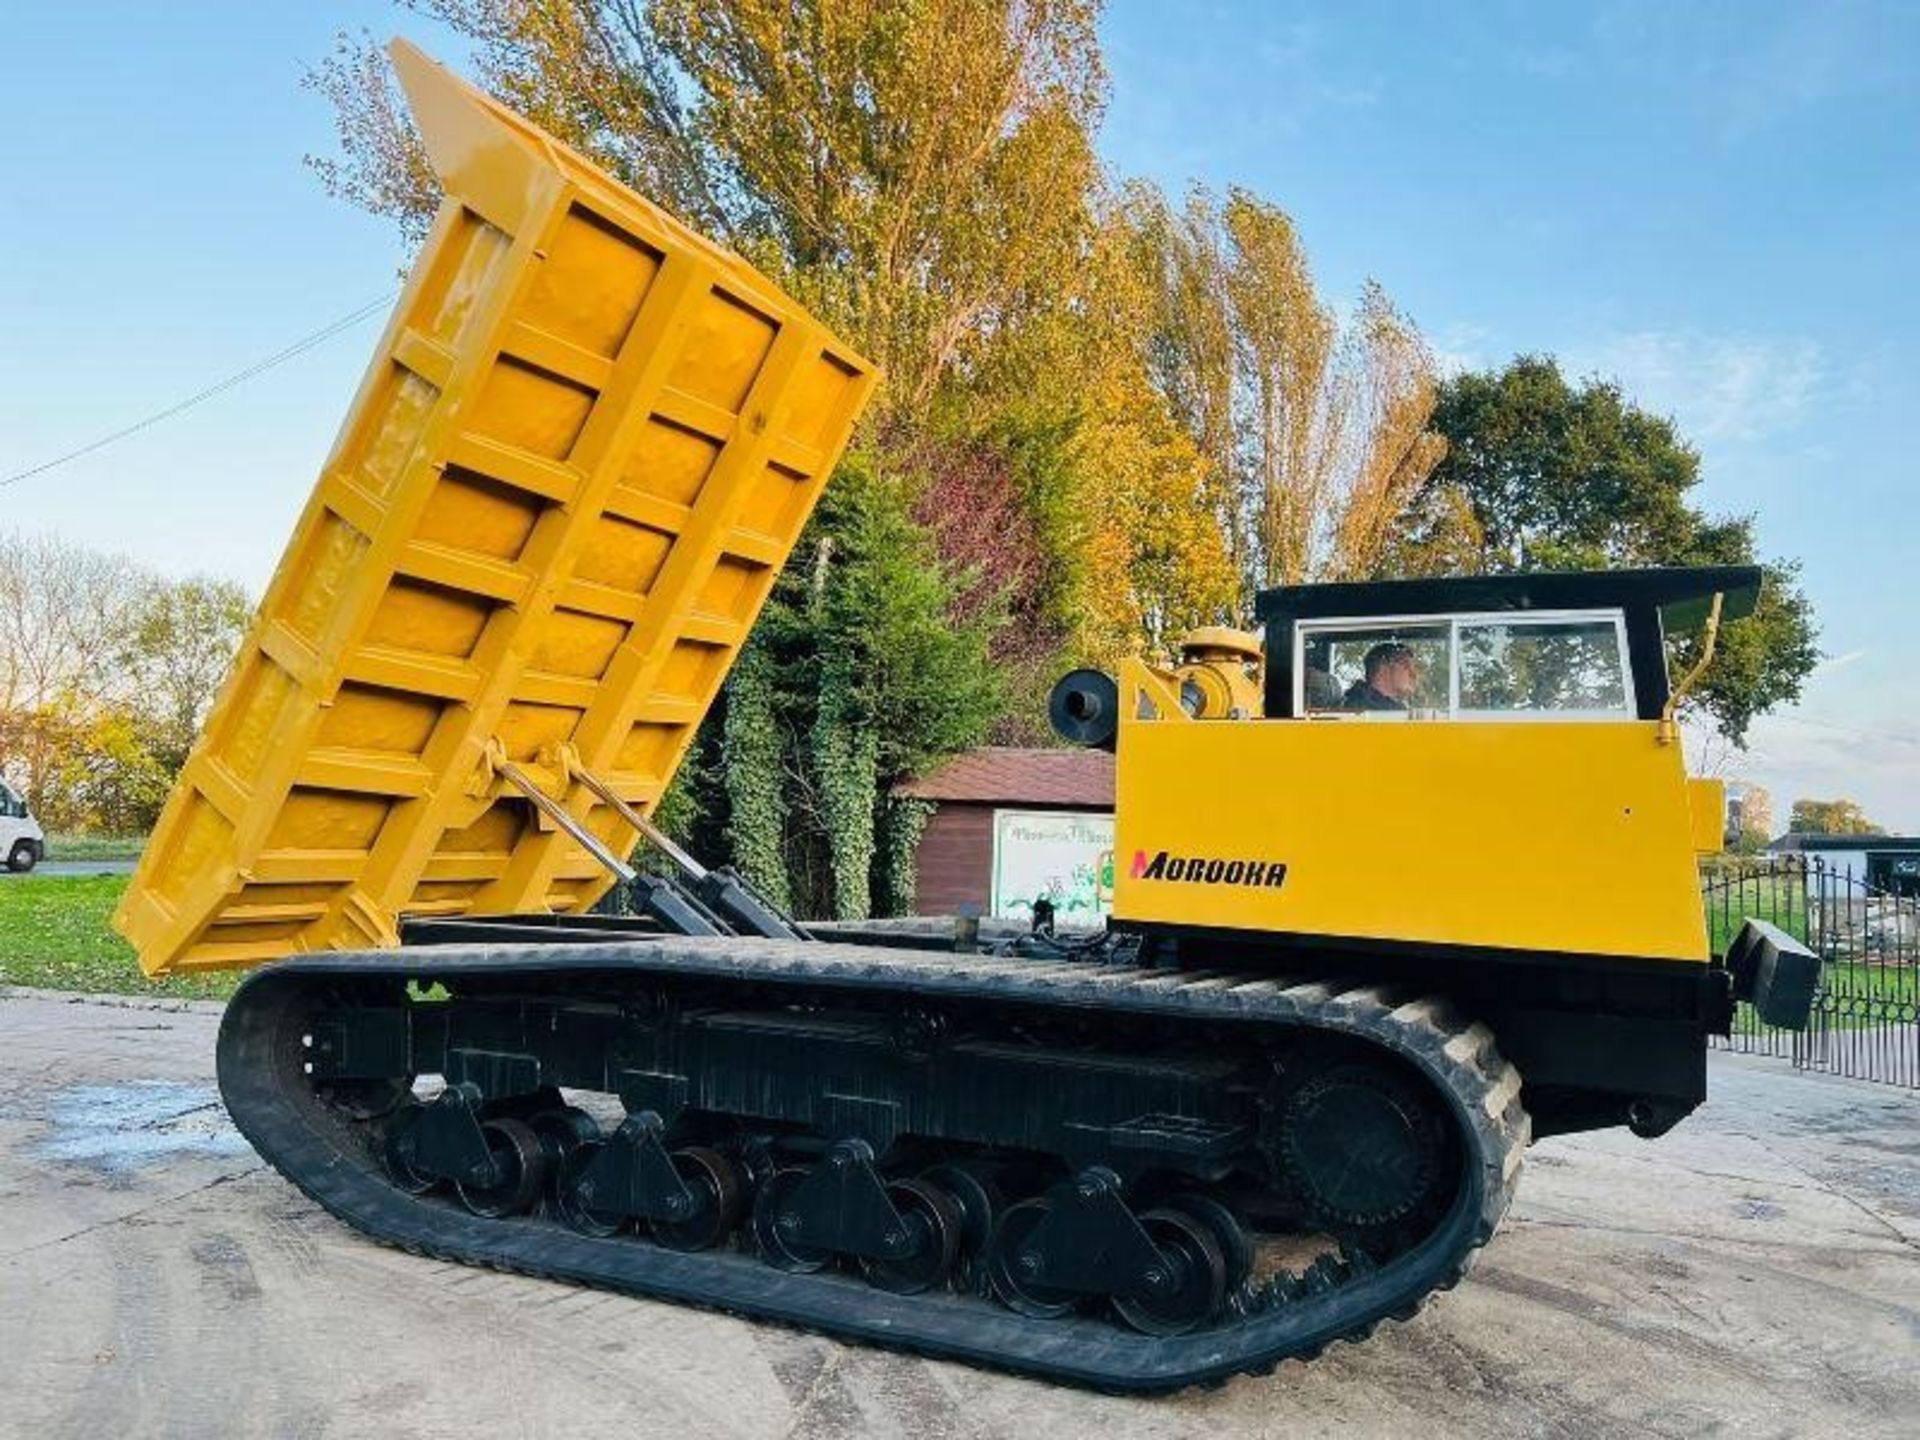 Morooka Mst2500 Tracked Dumper C/W Hydraulic Straight Tip - Image 9 of 12